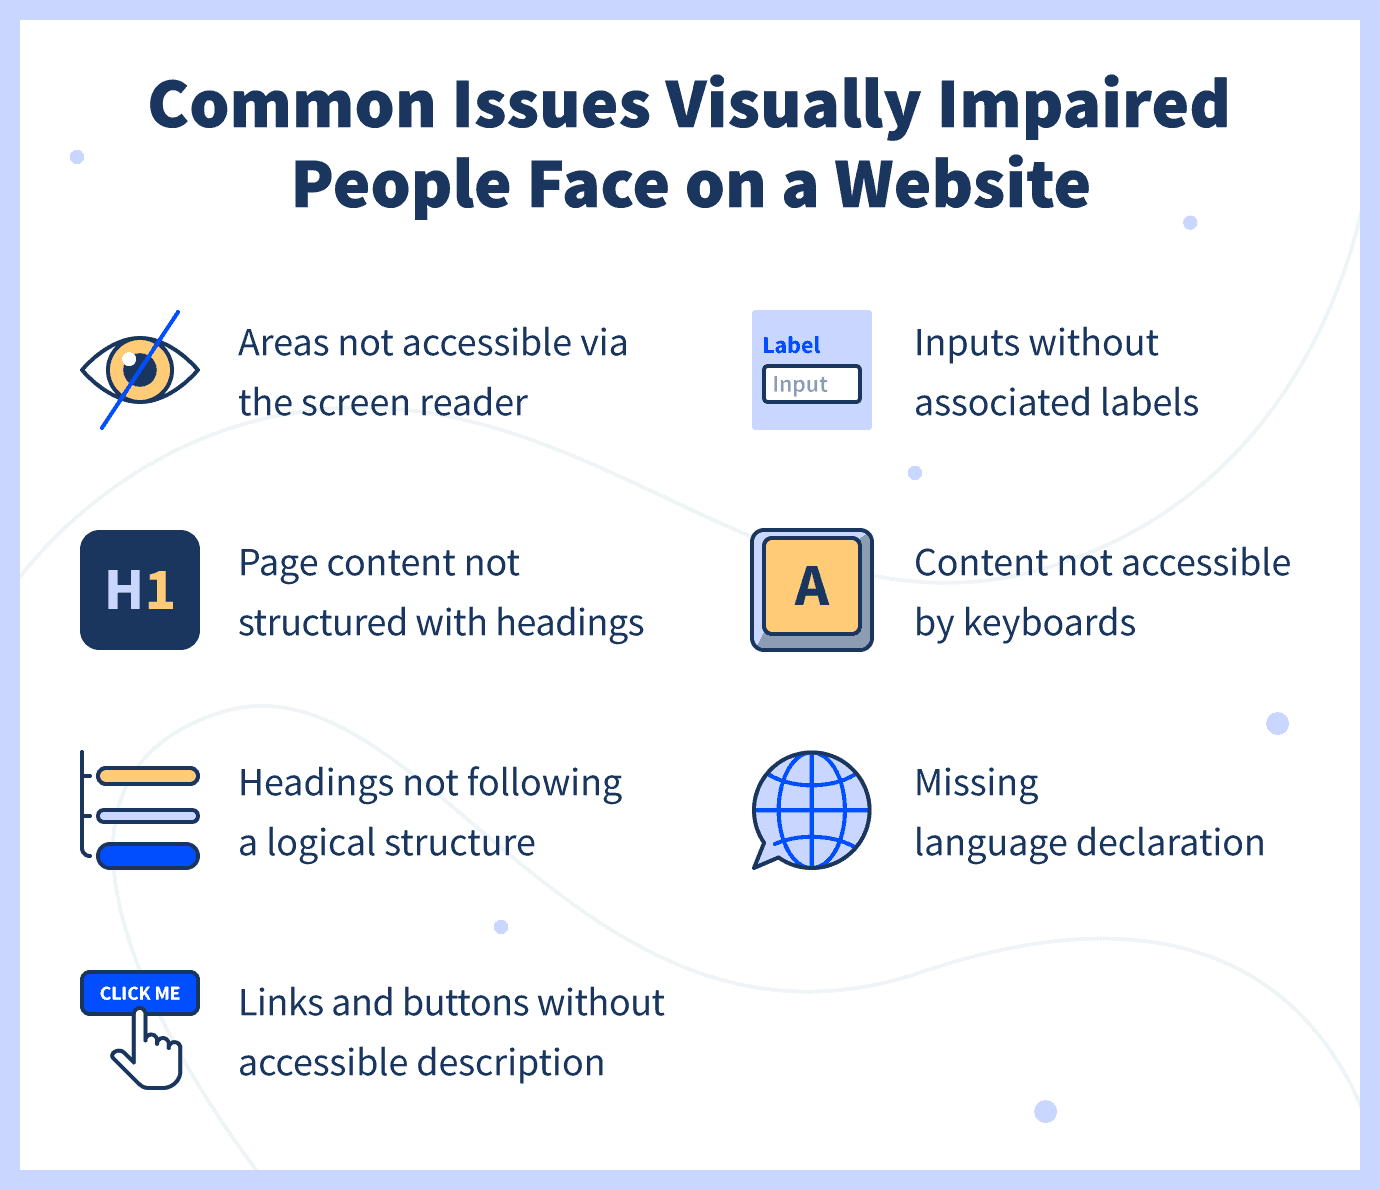 common issues visually impaired people face: Areas not accessible via the screen reader, Page content not structured with headings, Headings not following a logical structure, Links and buttons without accessible description, Inputs without associated labels, Content not accessible by keyboards, Missing language information